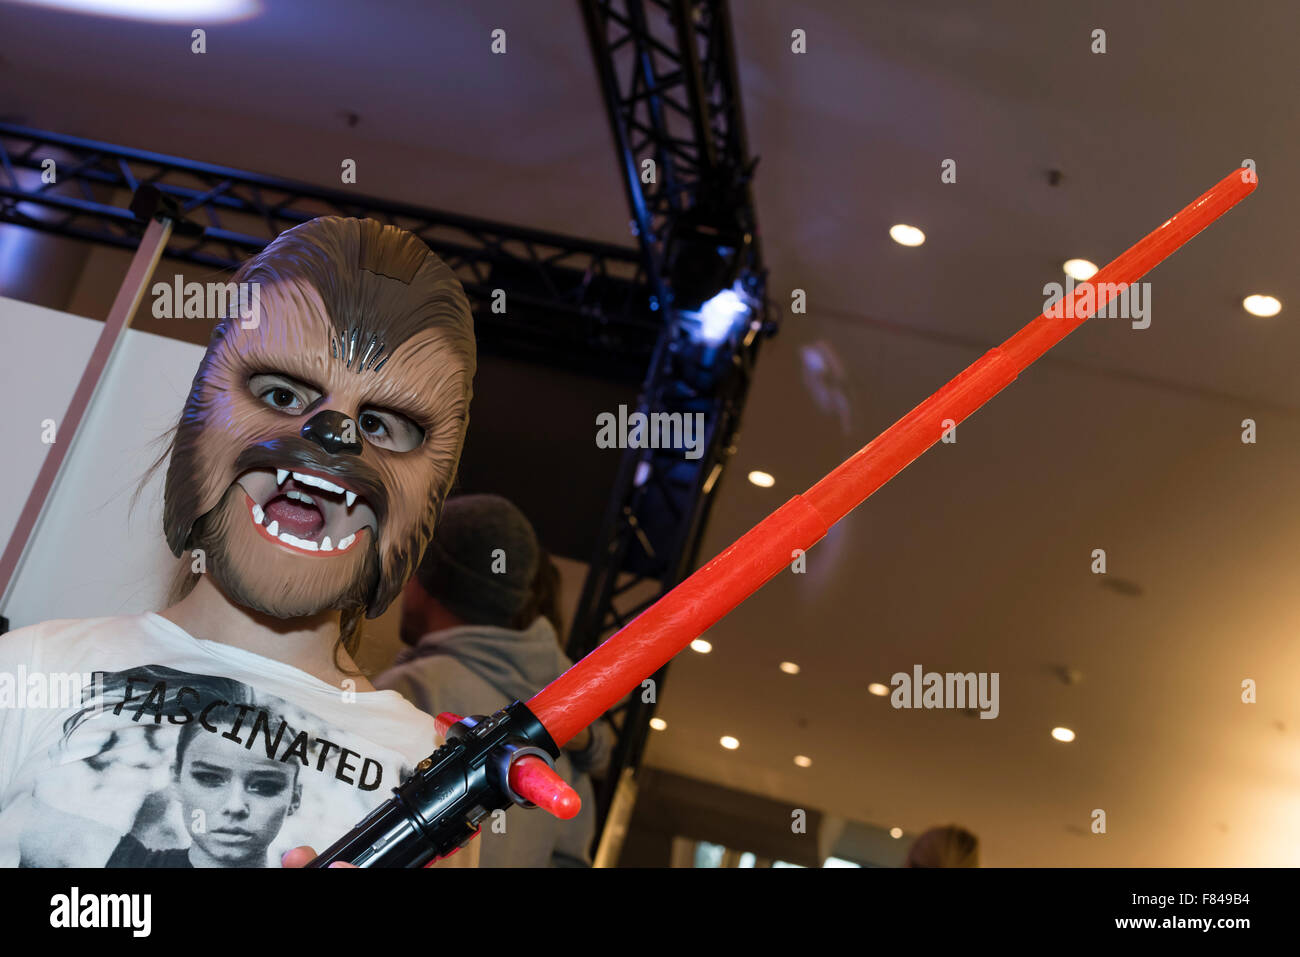 Zurich, Switzerland. 05th Dec, 2015. A little girl is posing with a  lightsaber and the mask of Star Wars character Chewbacca during a Star Wars  movie promotion event in a Zurich shopping